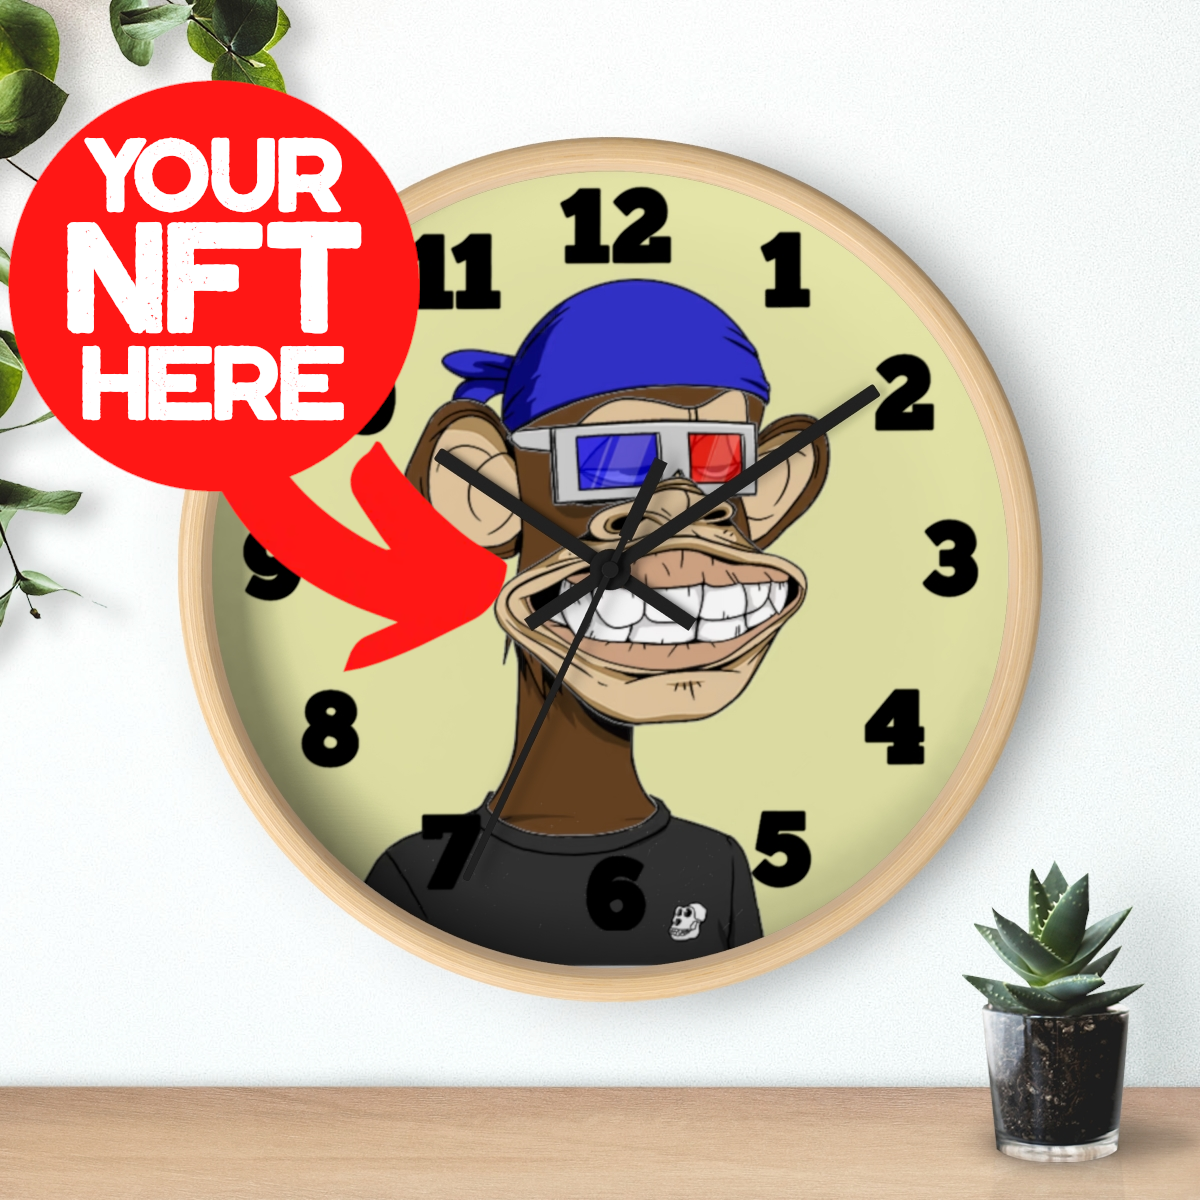 Send Personalized Photo Clock Online | Gift Personalized Photo Clock -  Frinza.com